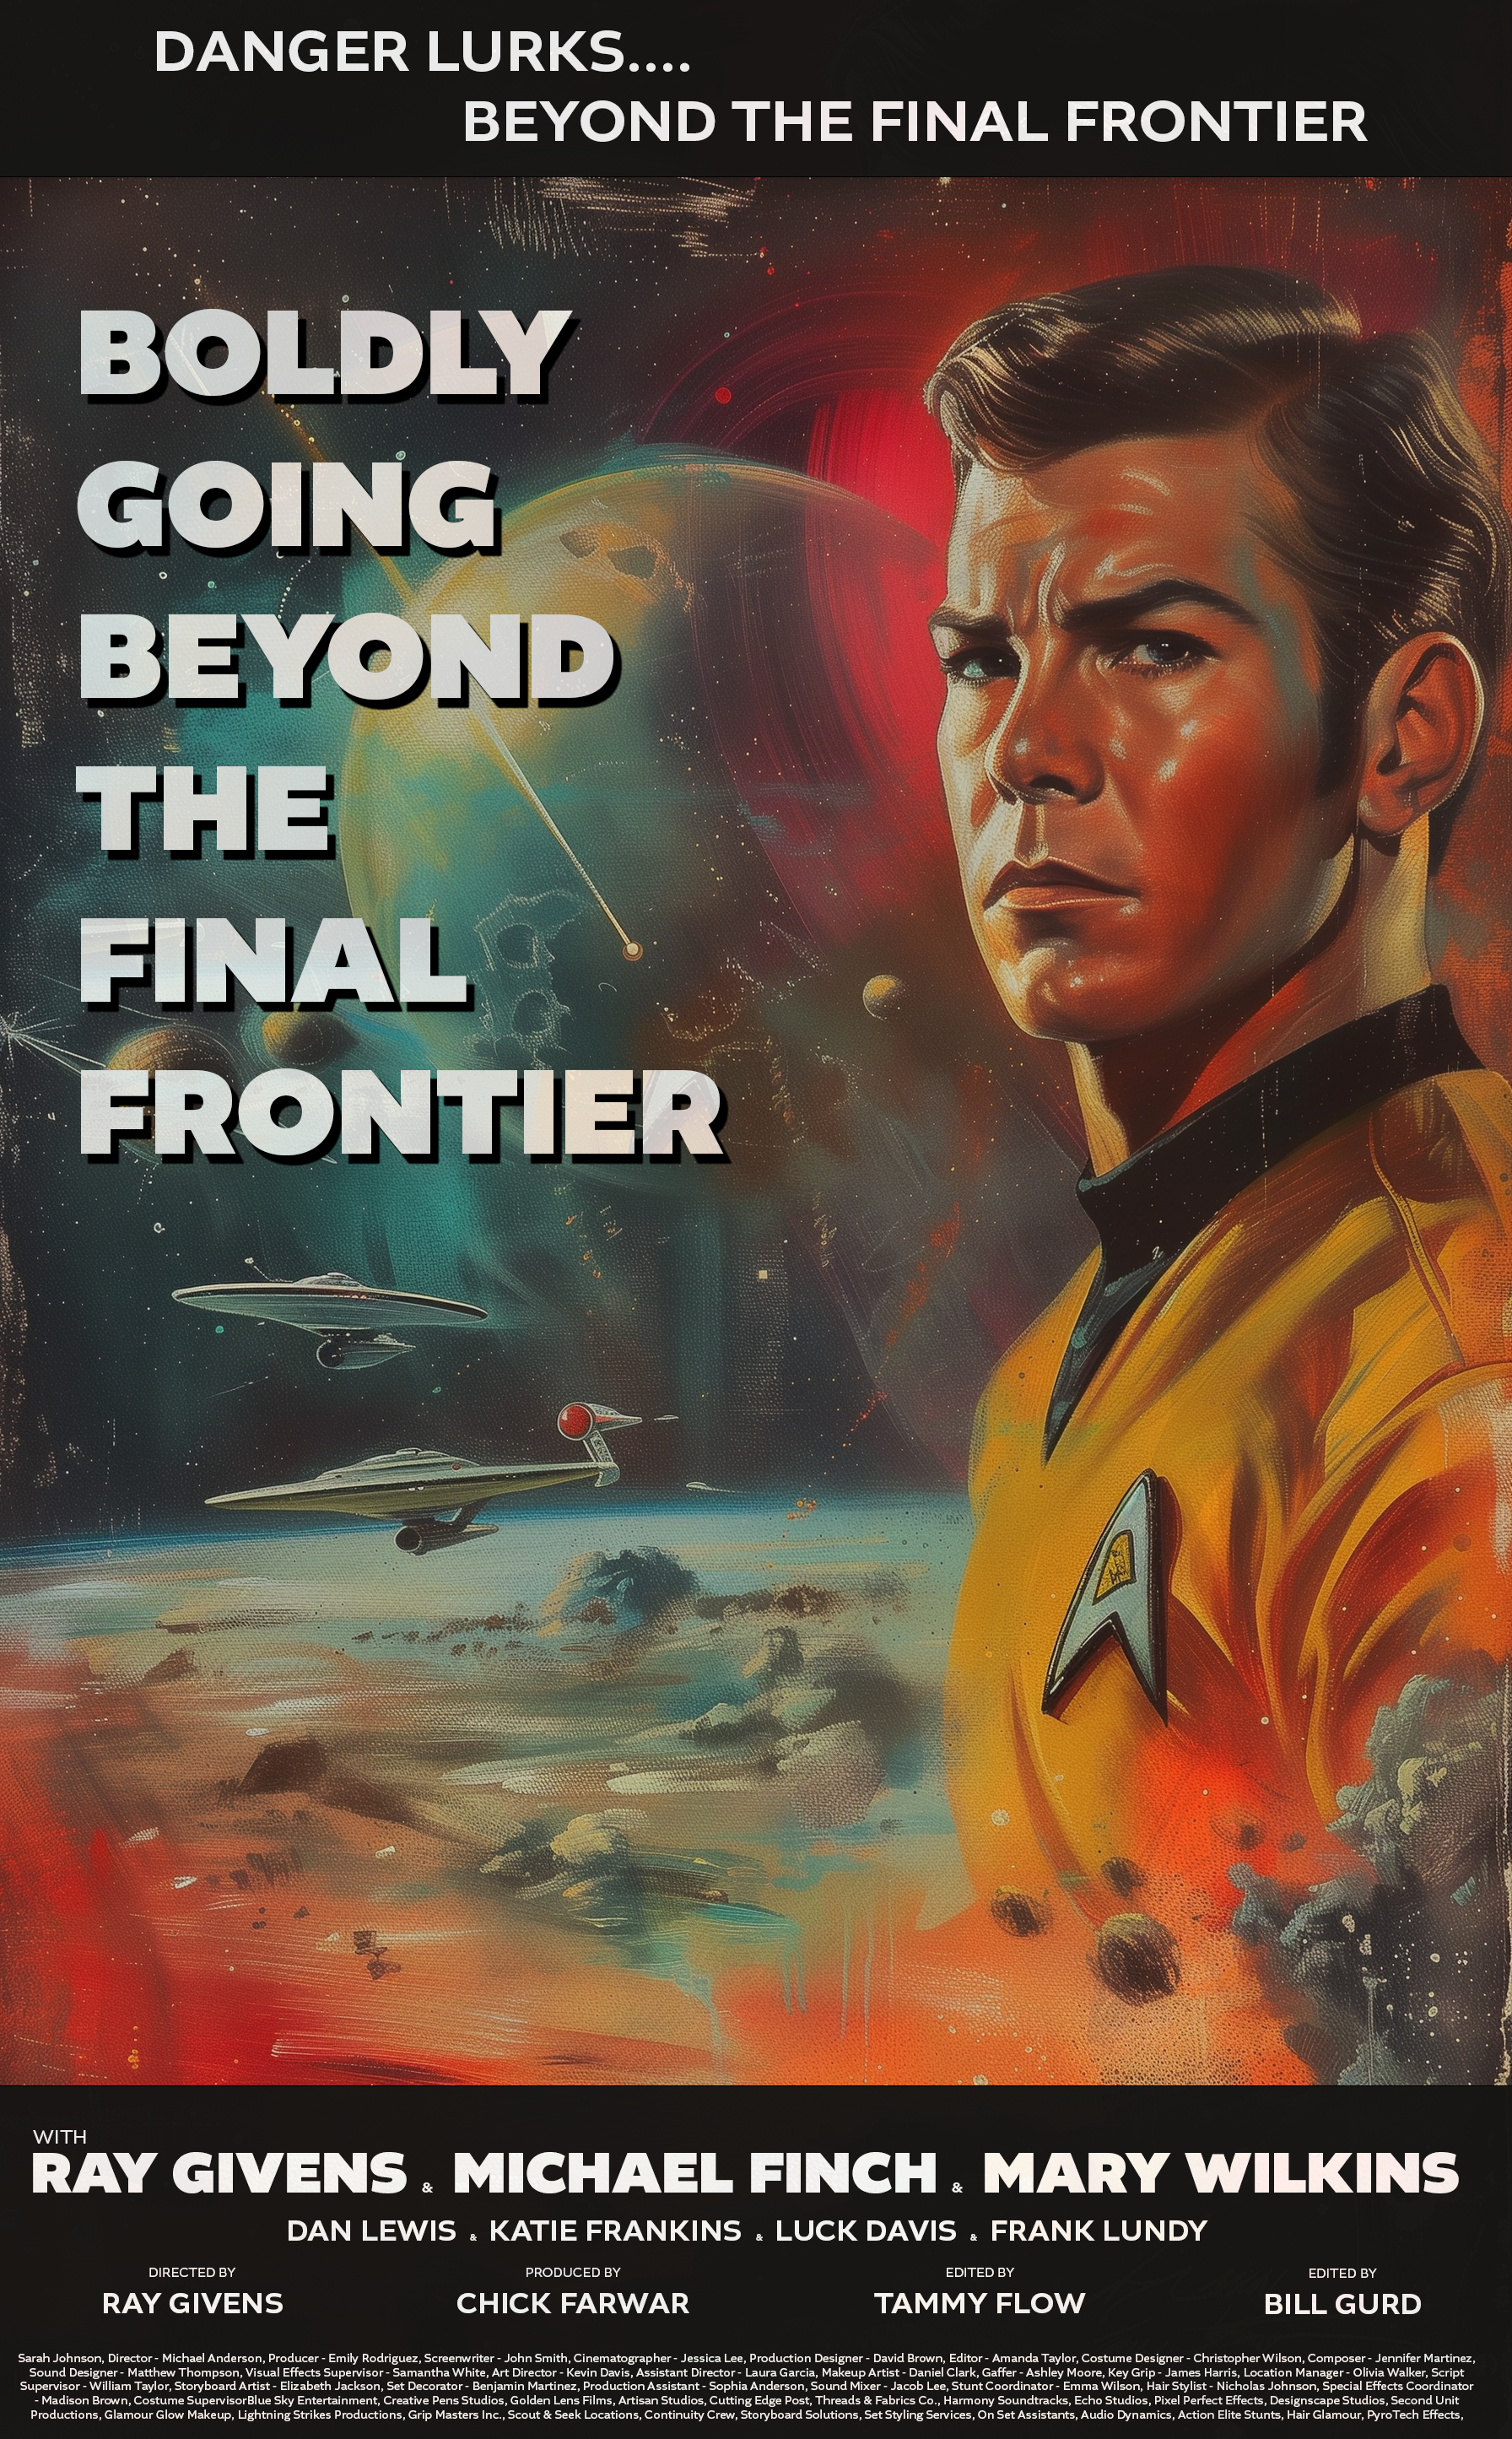 Name:  Beyond the Final Frontier.png
Views: 139
Size:  8.19 MB